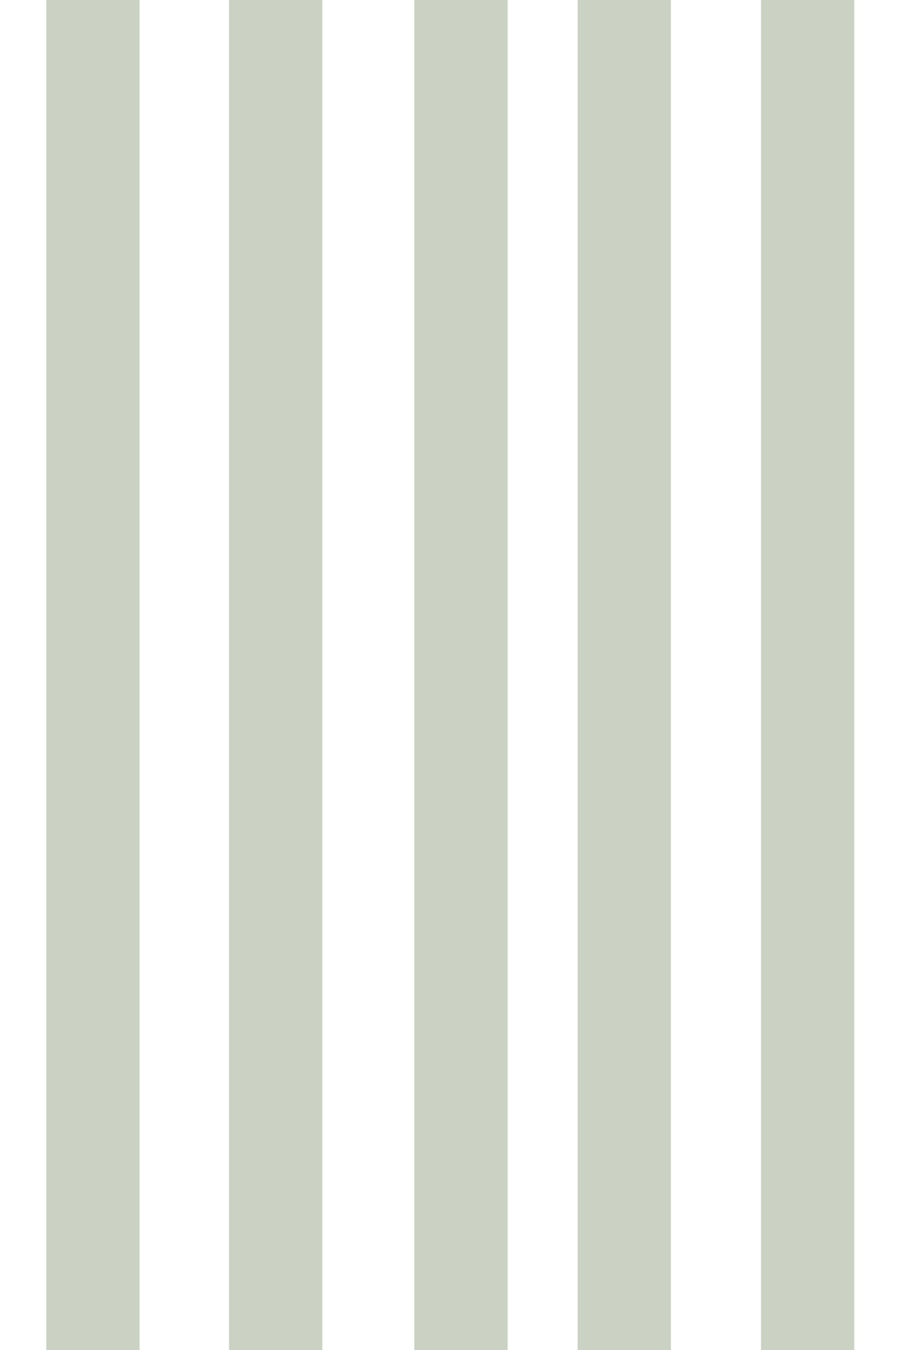 Woolf With Me Fitted Crib Sheet Stripes color_fern